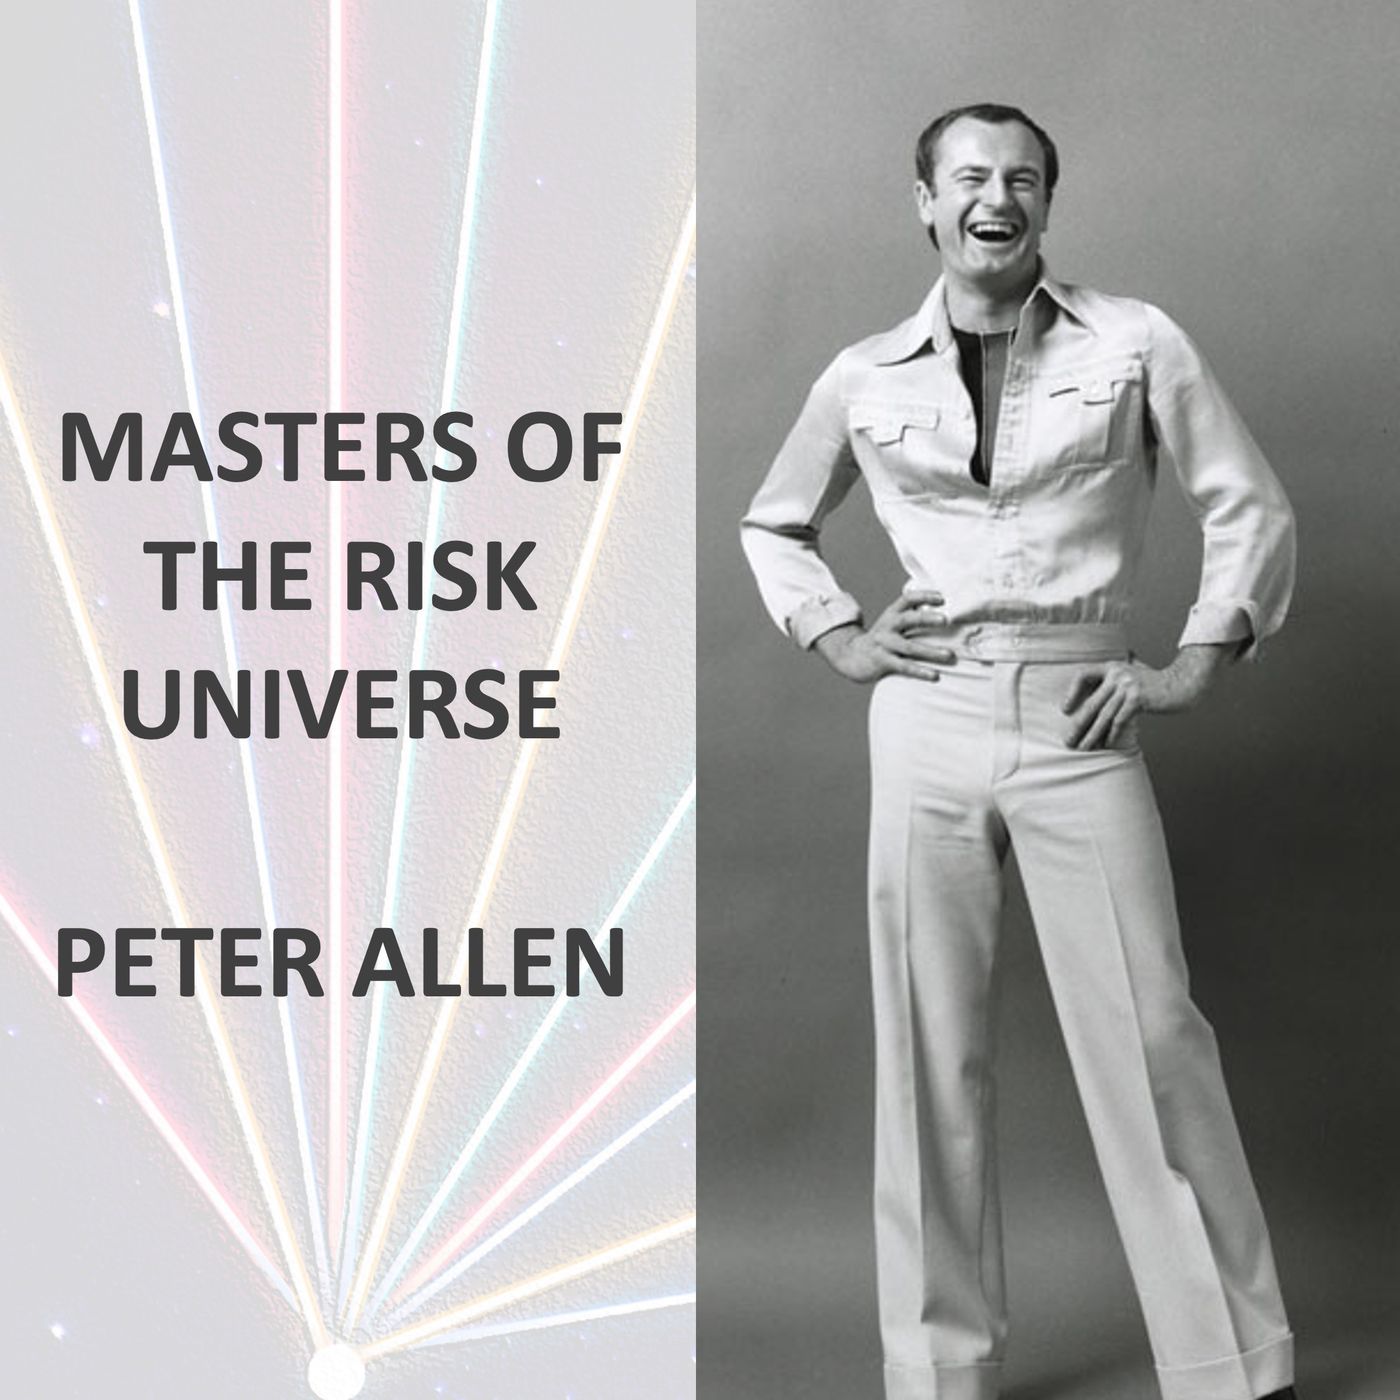 Masters of the Risk Universe... Peter Allen